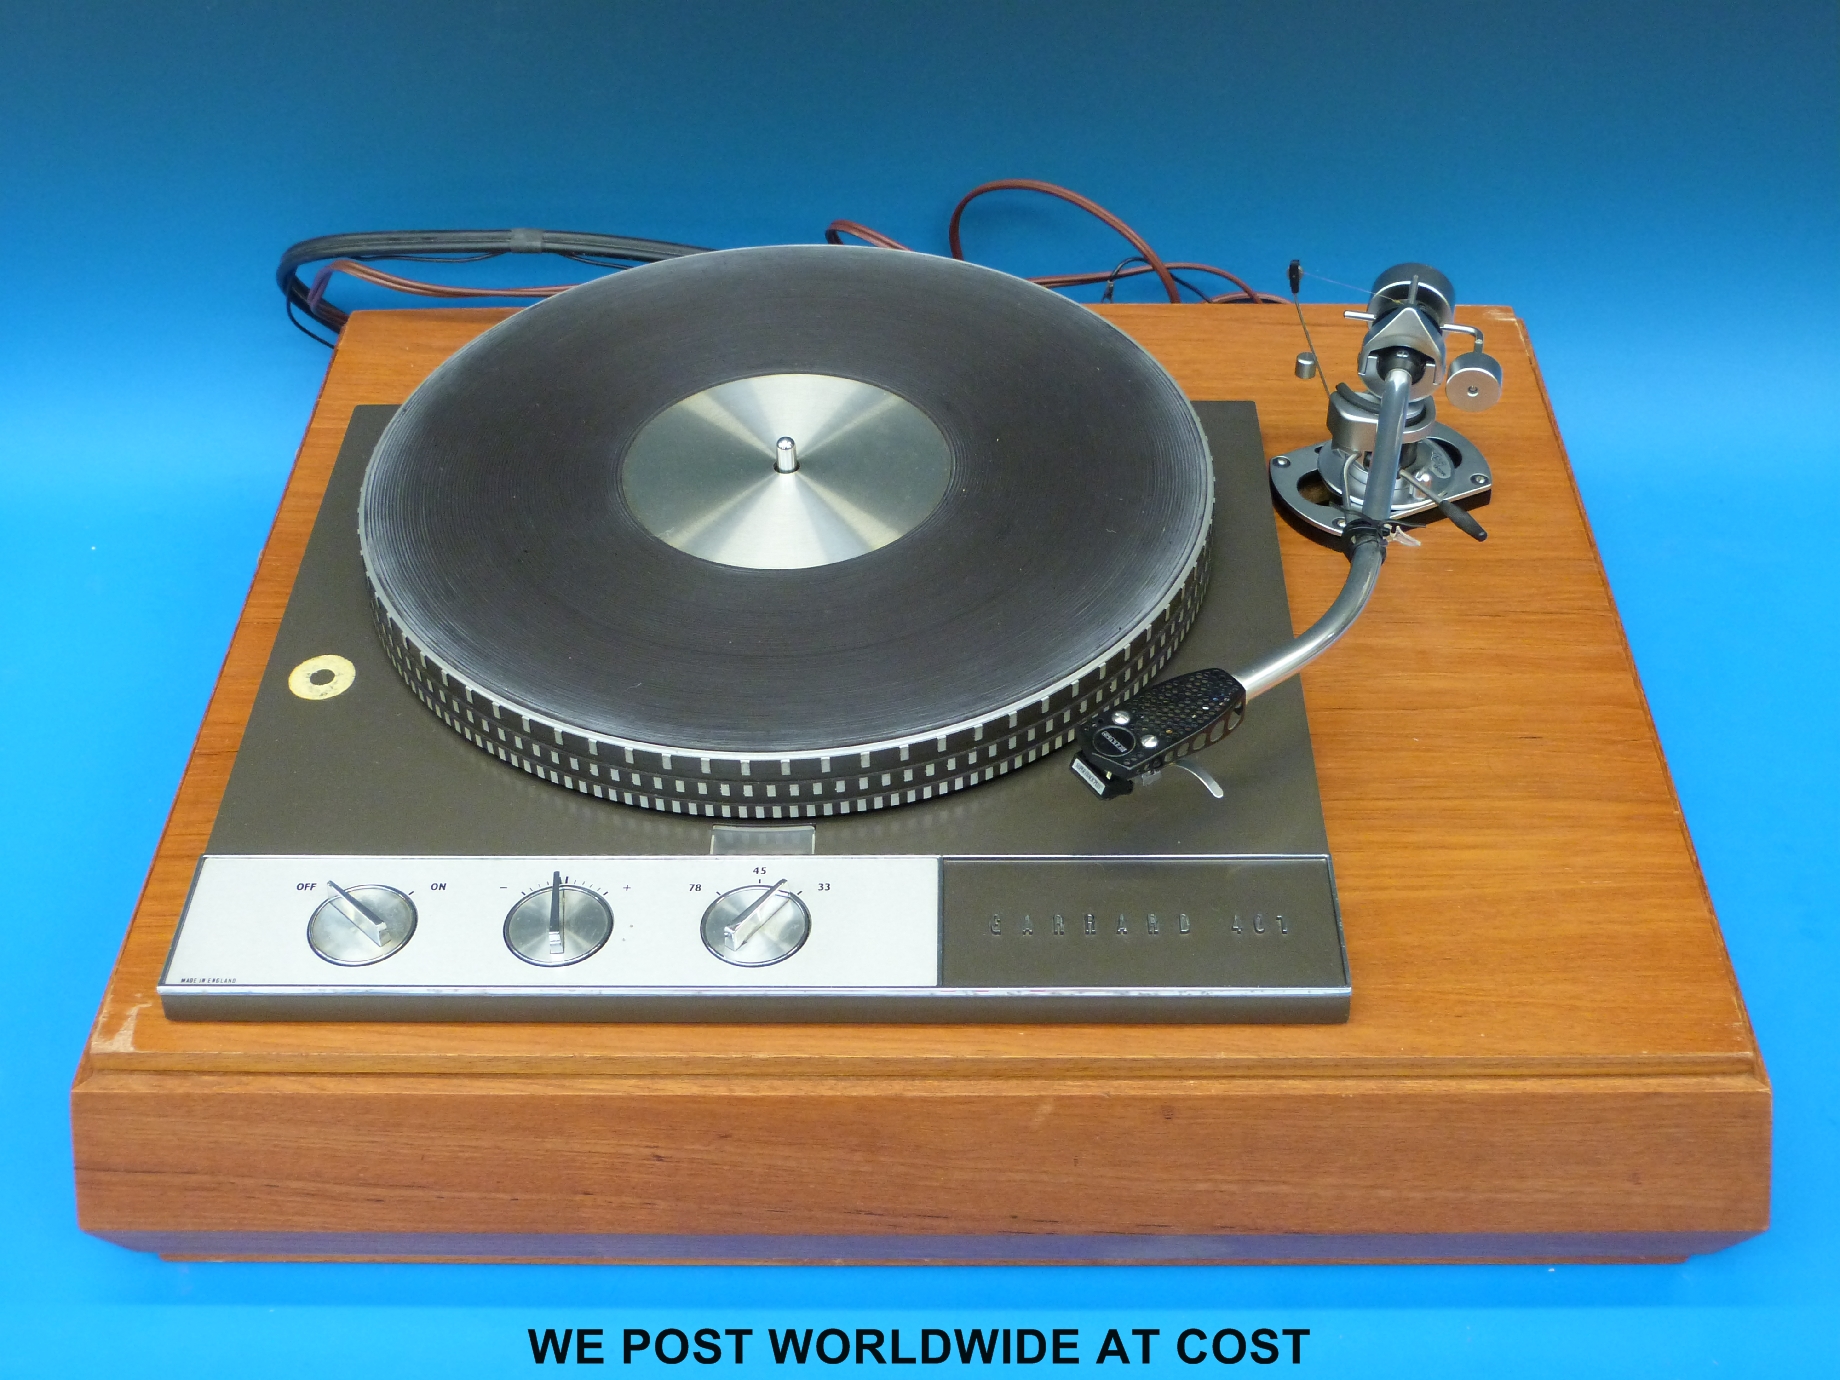 Garrard 401 turntable, fitted with an SME 3009 stylus, with instruction manual.